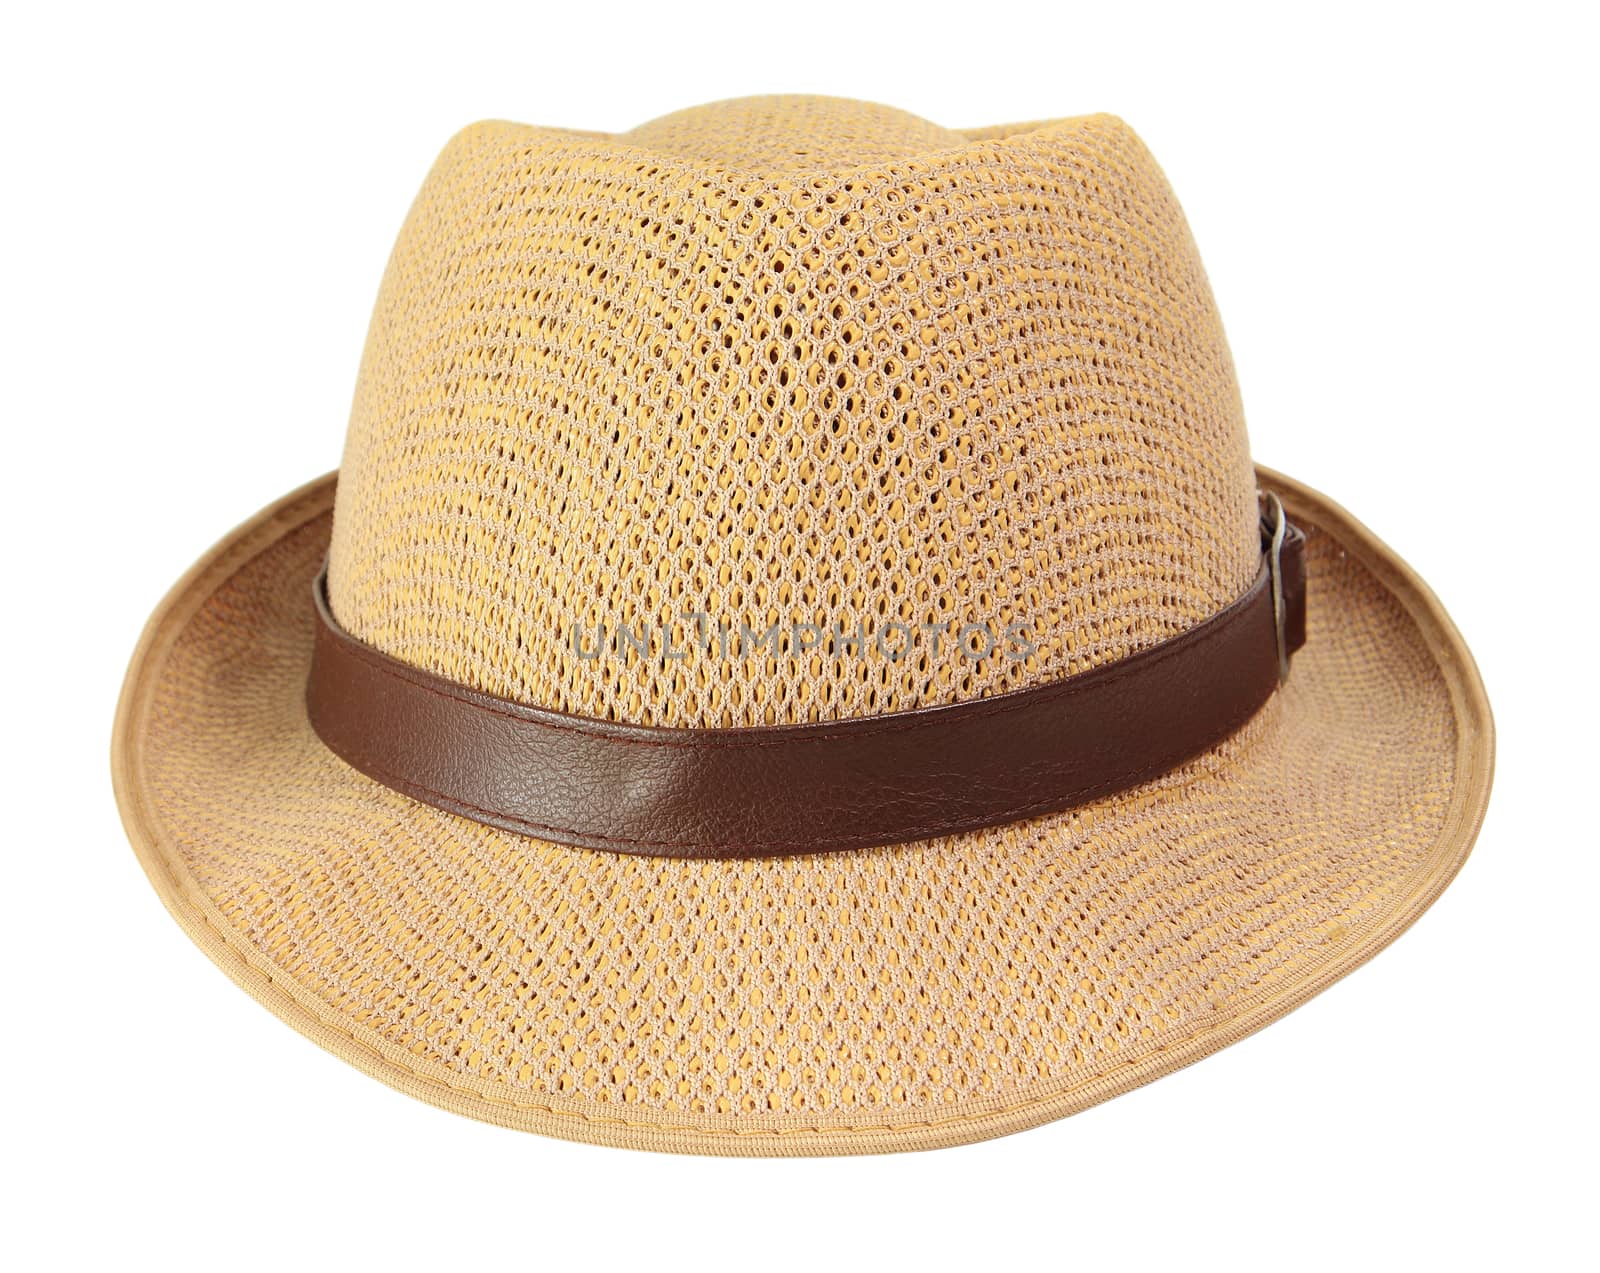 Straw hat isolated on white by foto76